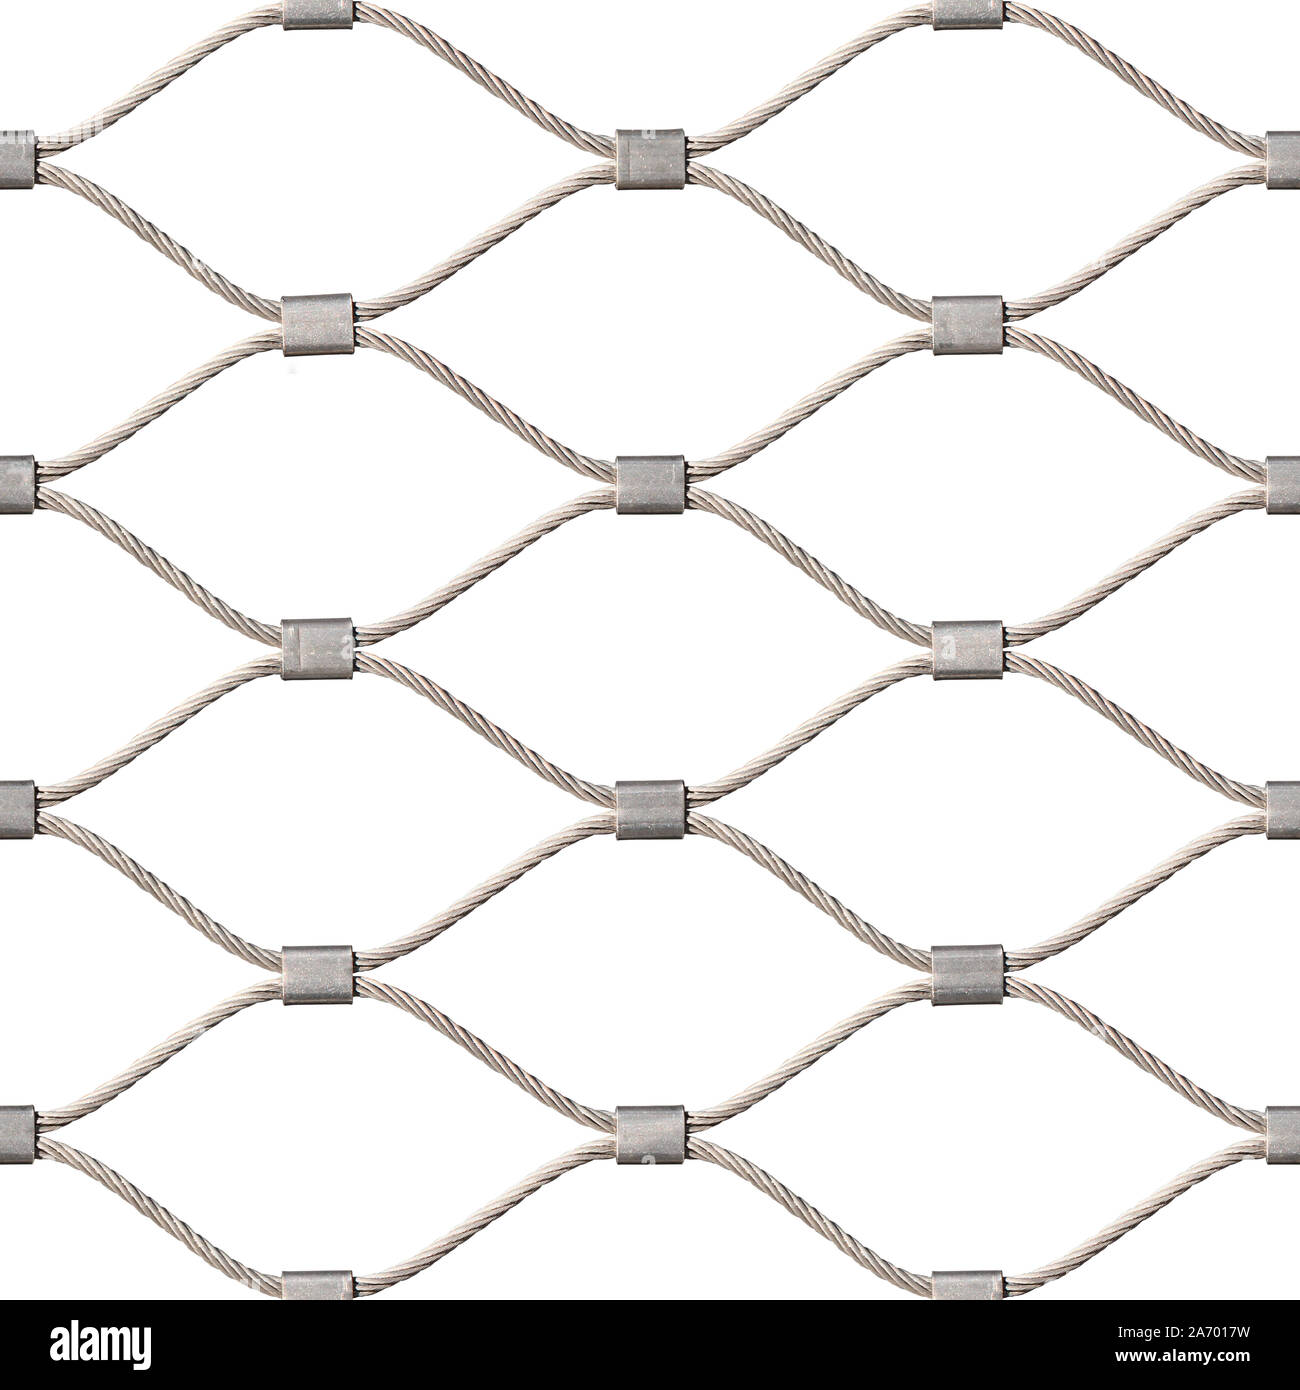 Seamless texture metal mesh fence Cut Out Stock Images & Pictures - Alamy